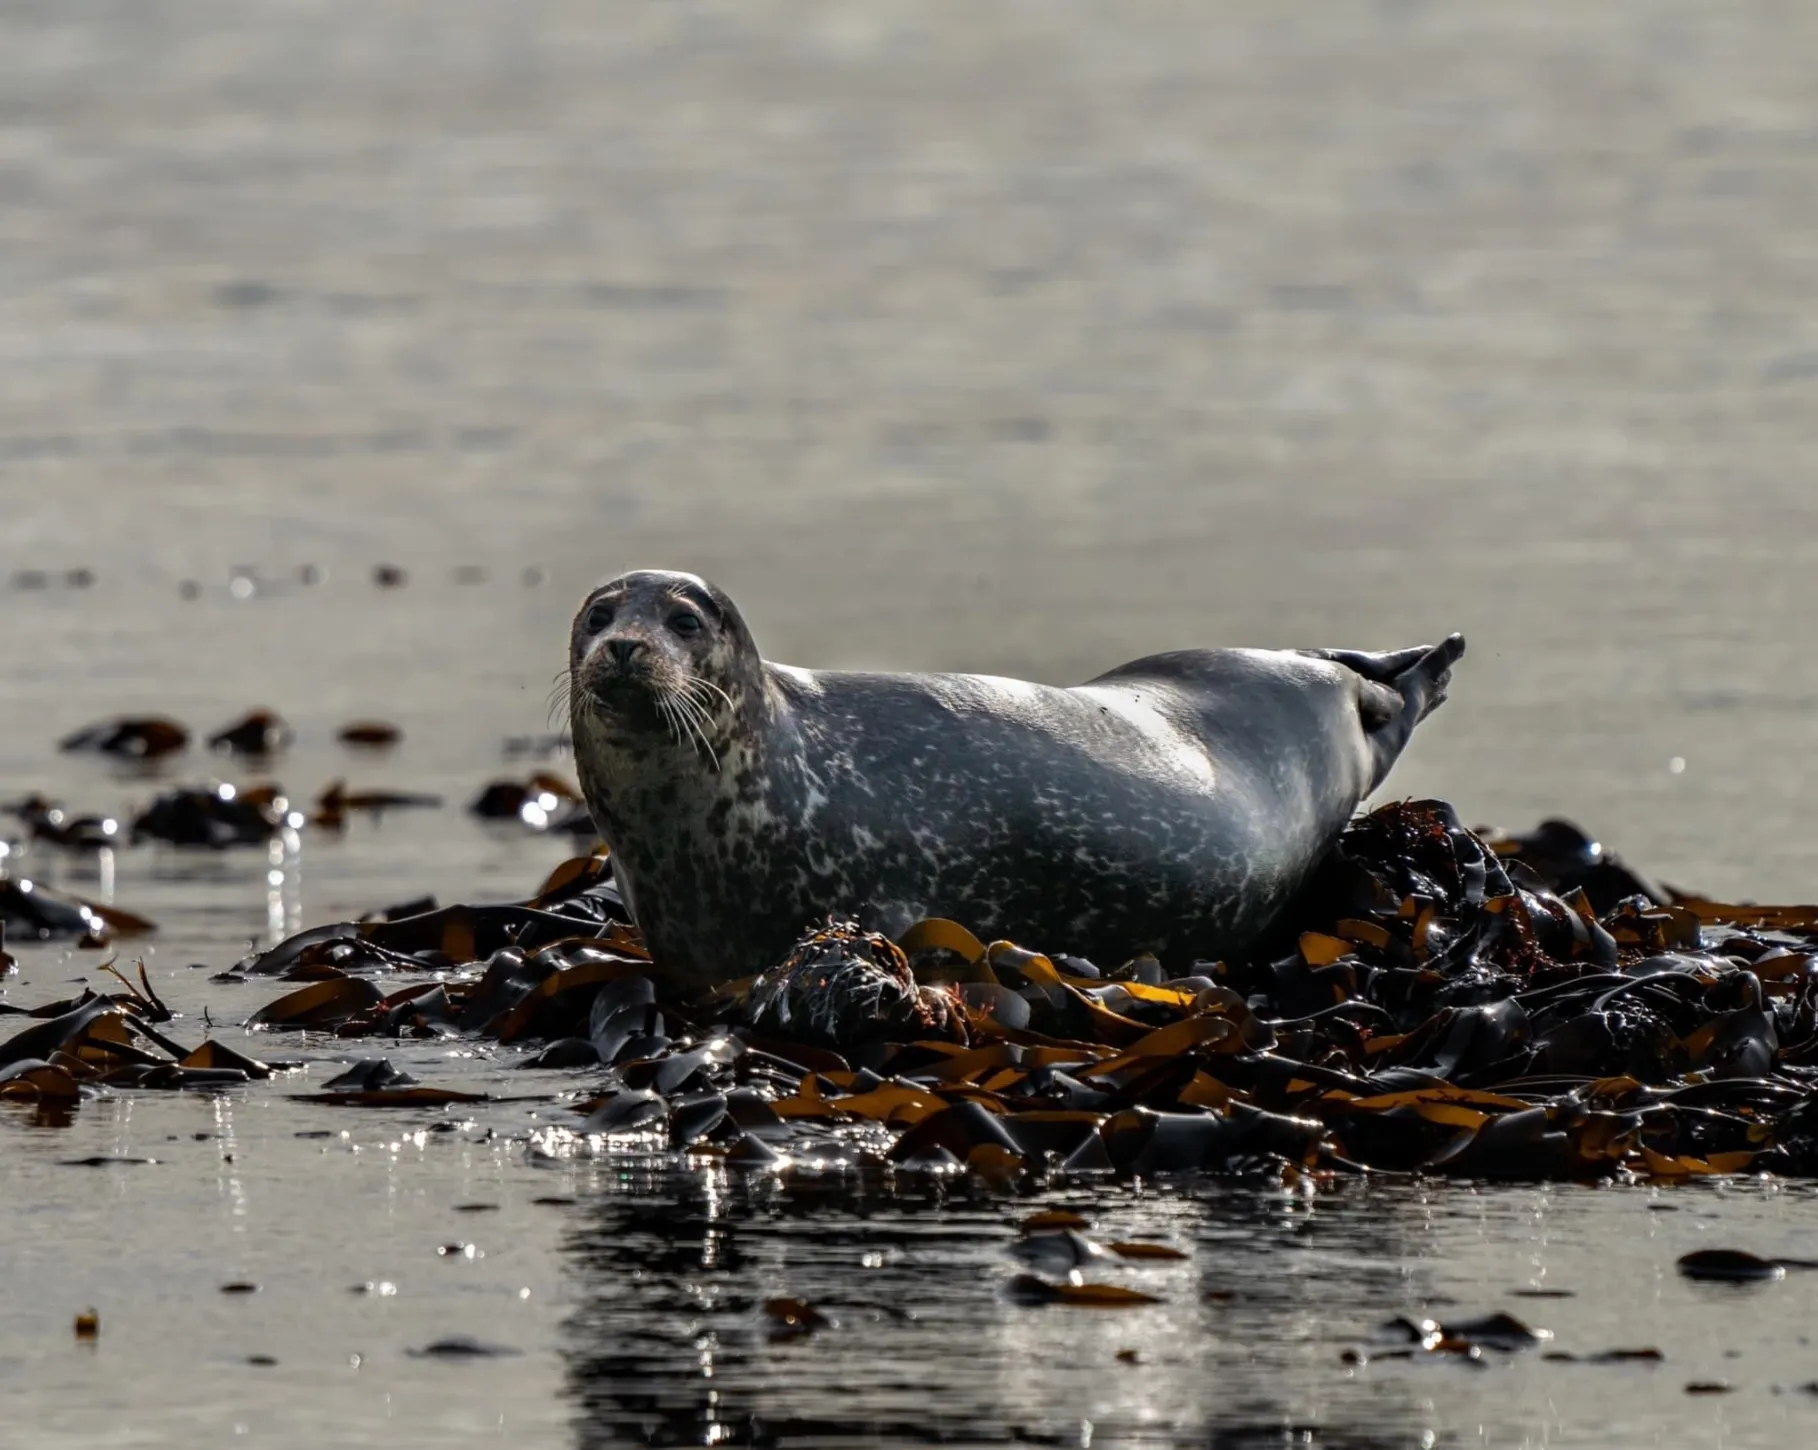 Surrounded by sea water, and belly down on a rock covered in wide ribbons of shiny seaweed sits a shiny, wet seal. It looks with curiosity towards the photographer, a dark grey face and back with spots of lighter grey on its underbelly. The sun reflects off the brow area and gives the appearance of raised eyebrows above dark, round eyes. The muzzle area is lighter coloured with a dark small nose and whiskers bristling from both ‘cheeks’. 